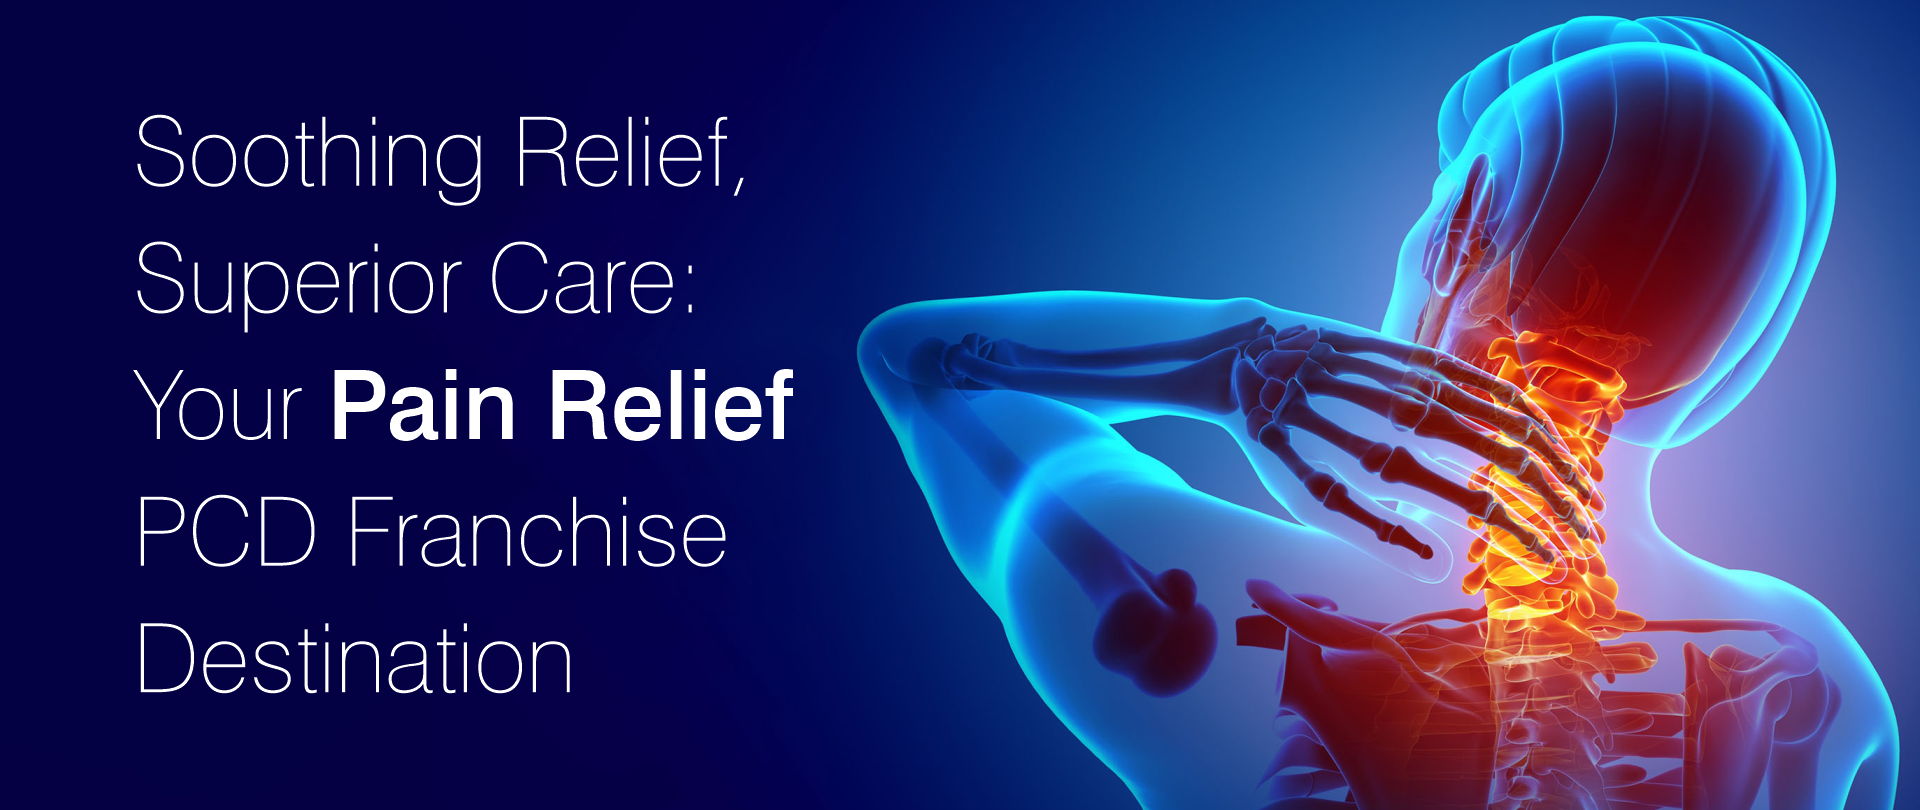 Best PCD Franchise Company for Pain Relief Medicines